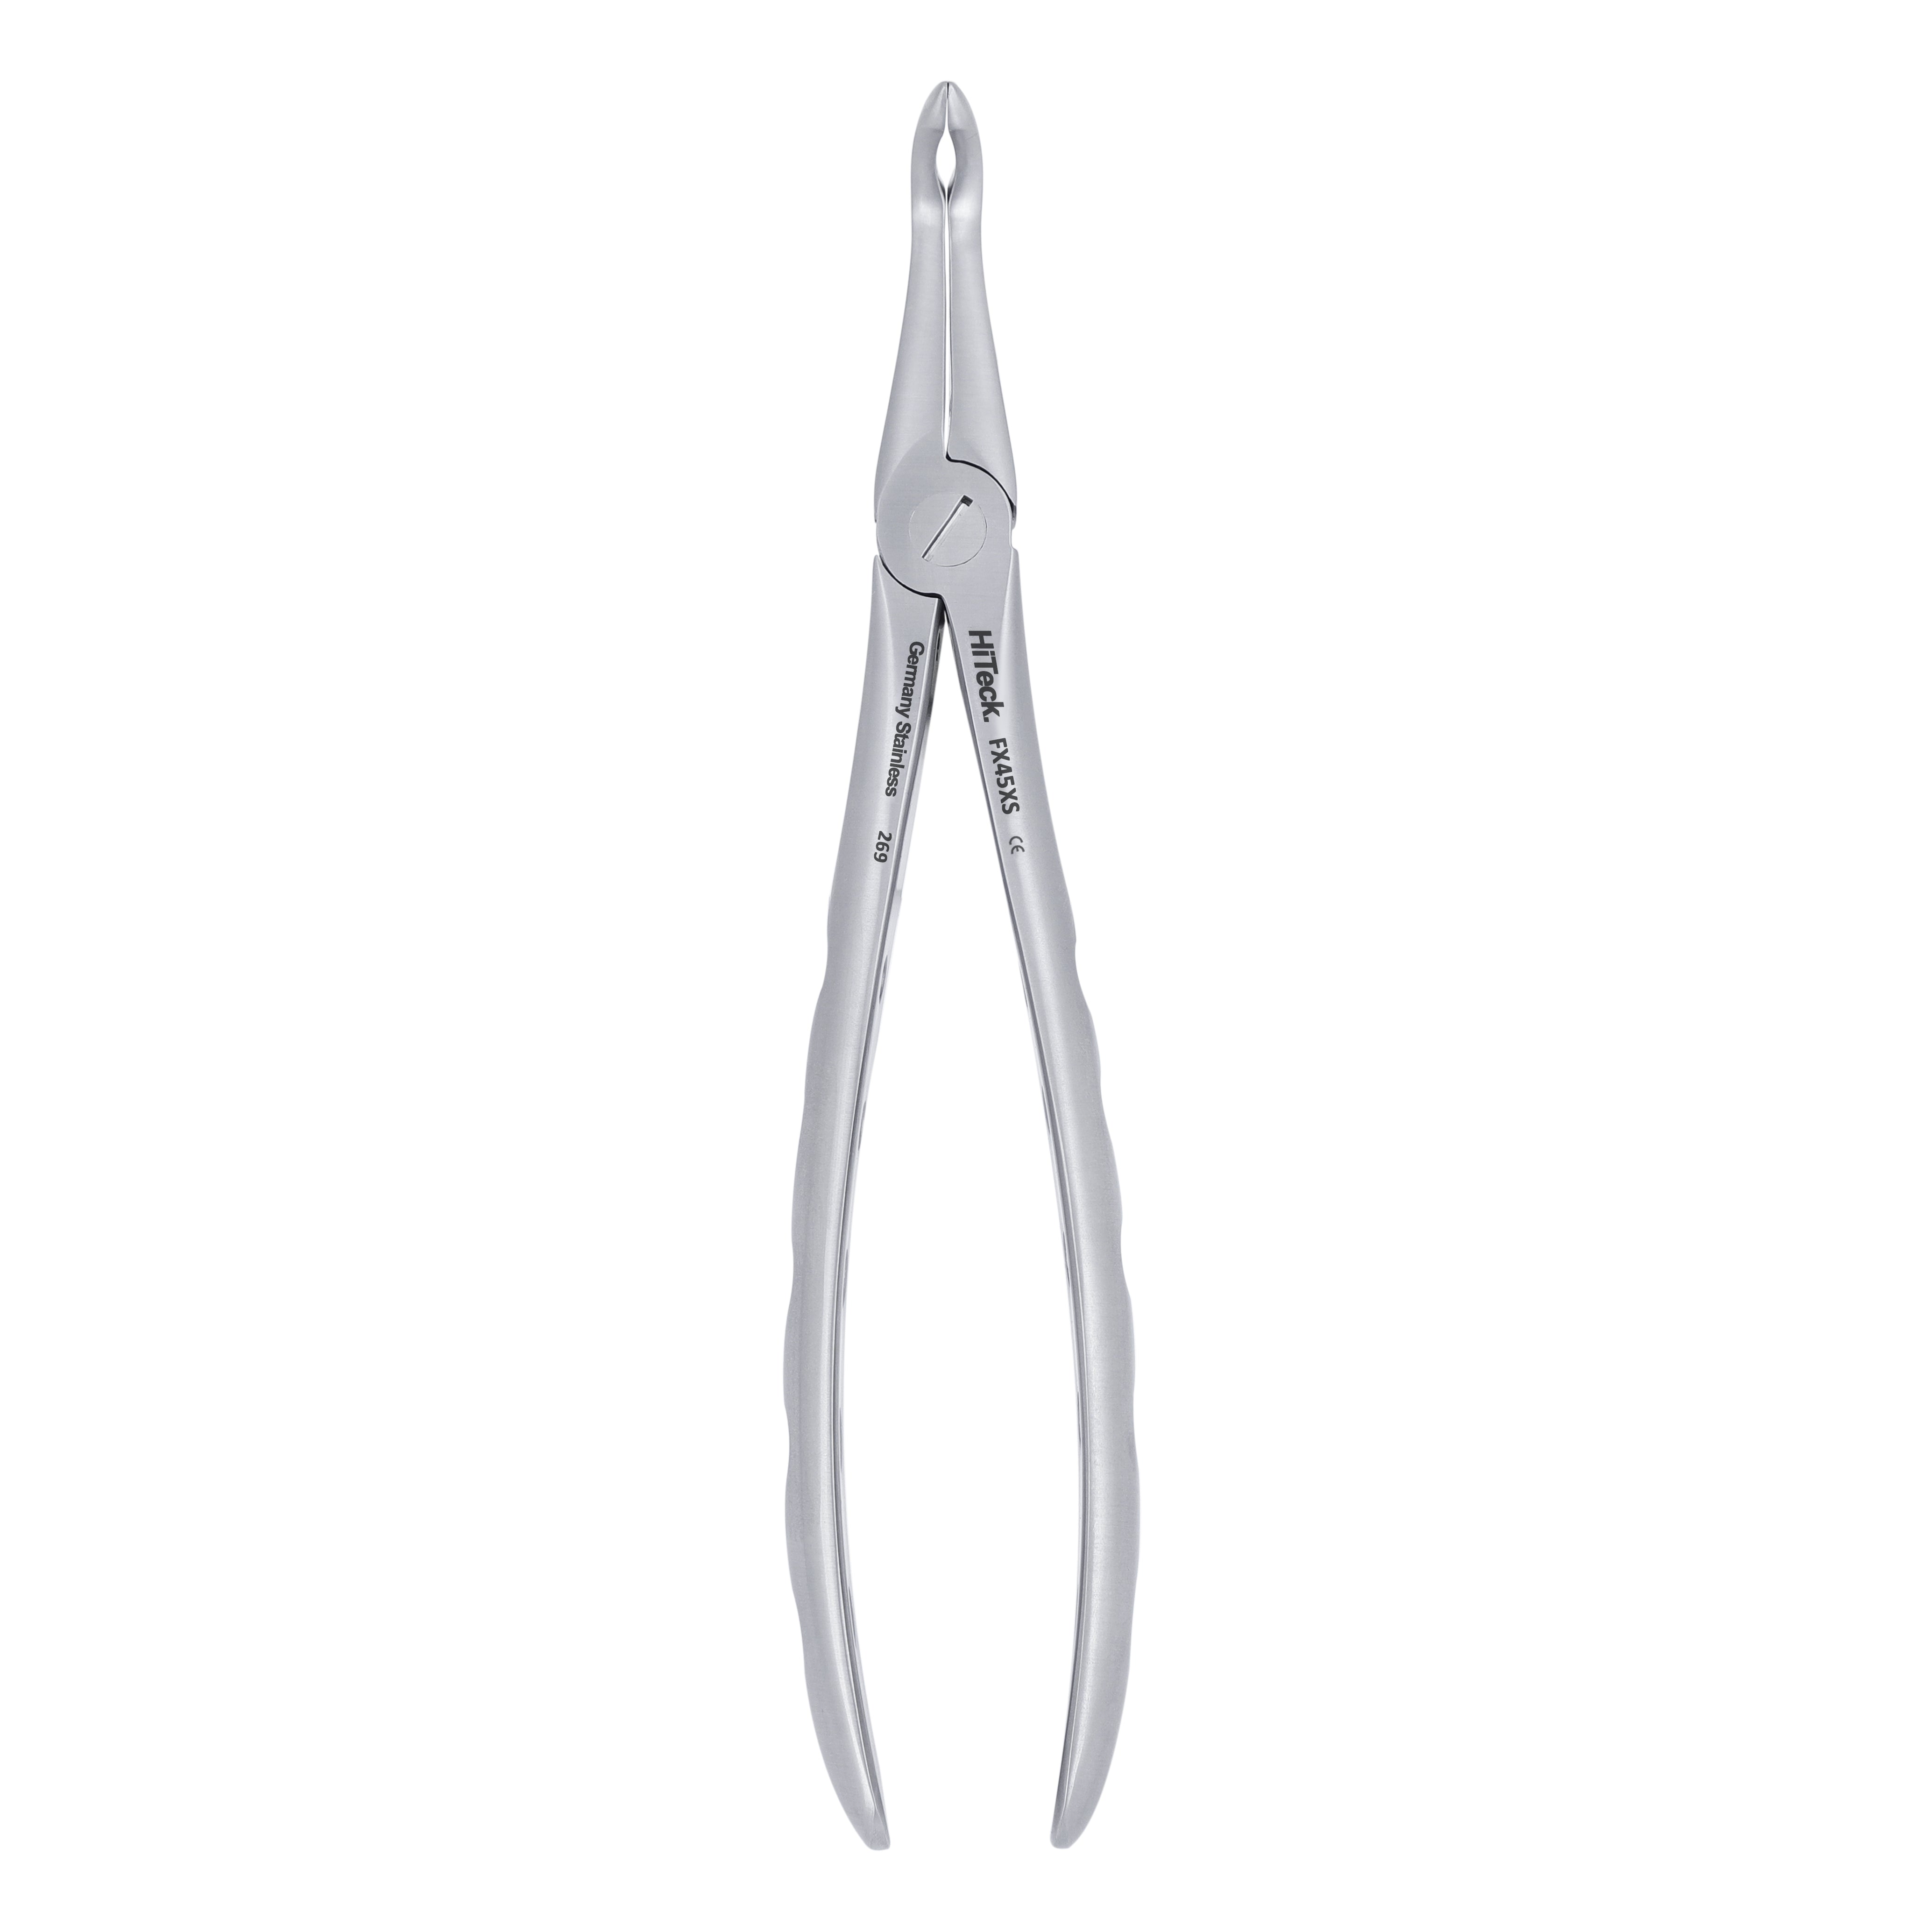 45 Lower Roots Serrated Atraumair Extraction Forceps - HiTeck Medical Instruments